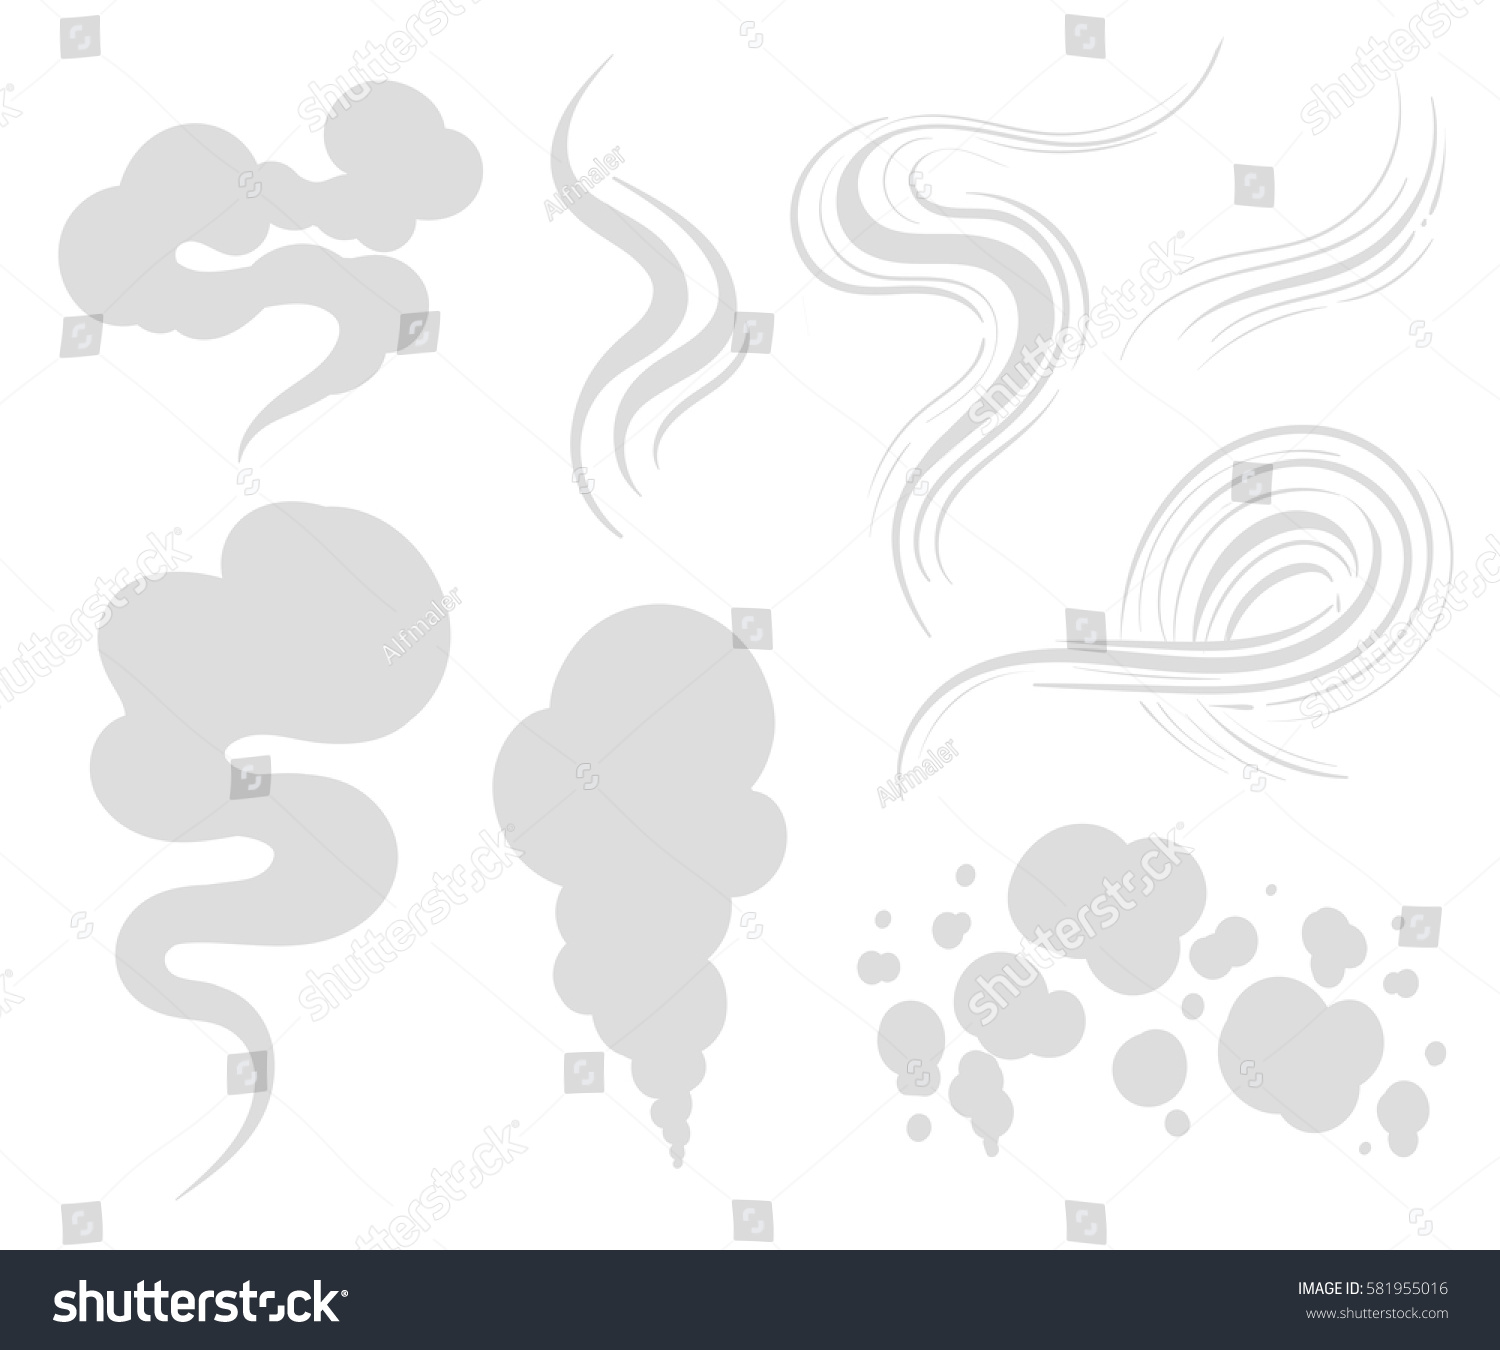 Smoke Vector Collection Illustration Set Isolated Stock Vector ...